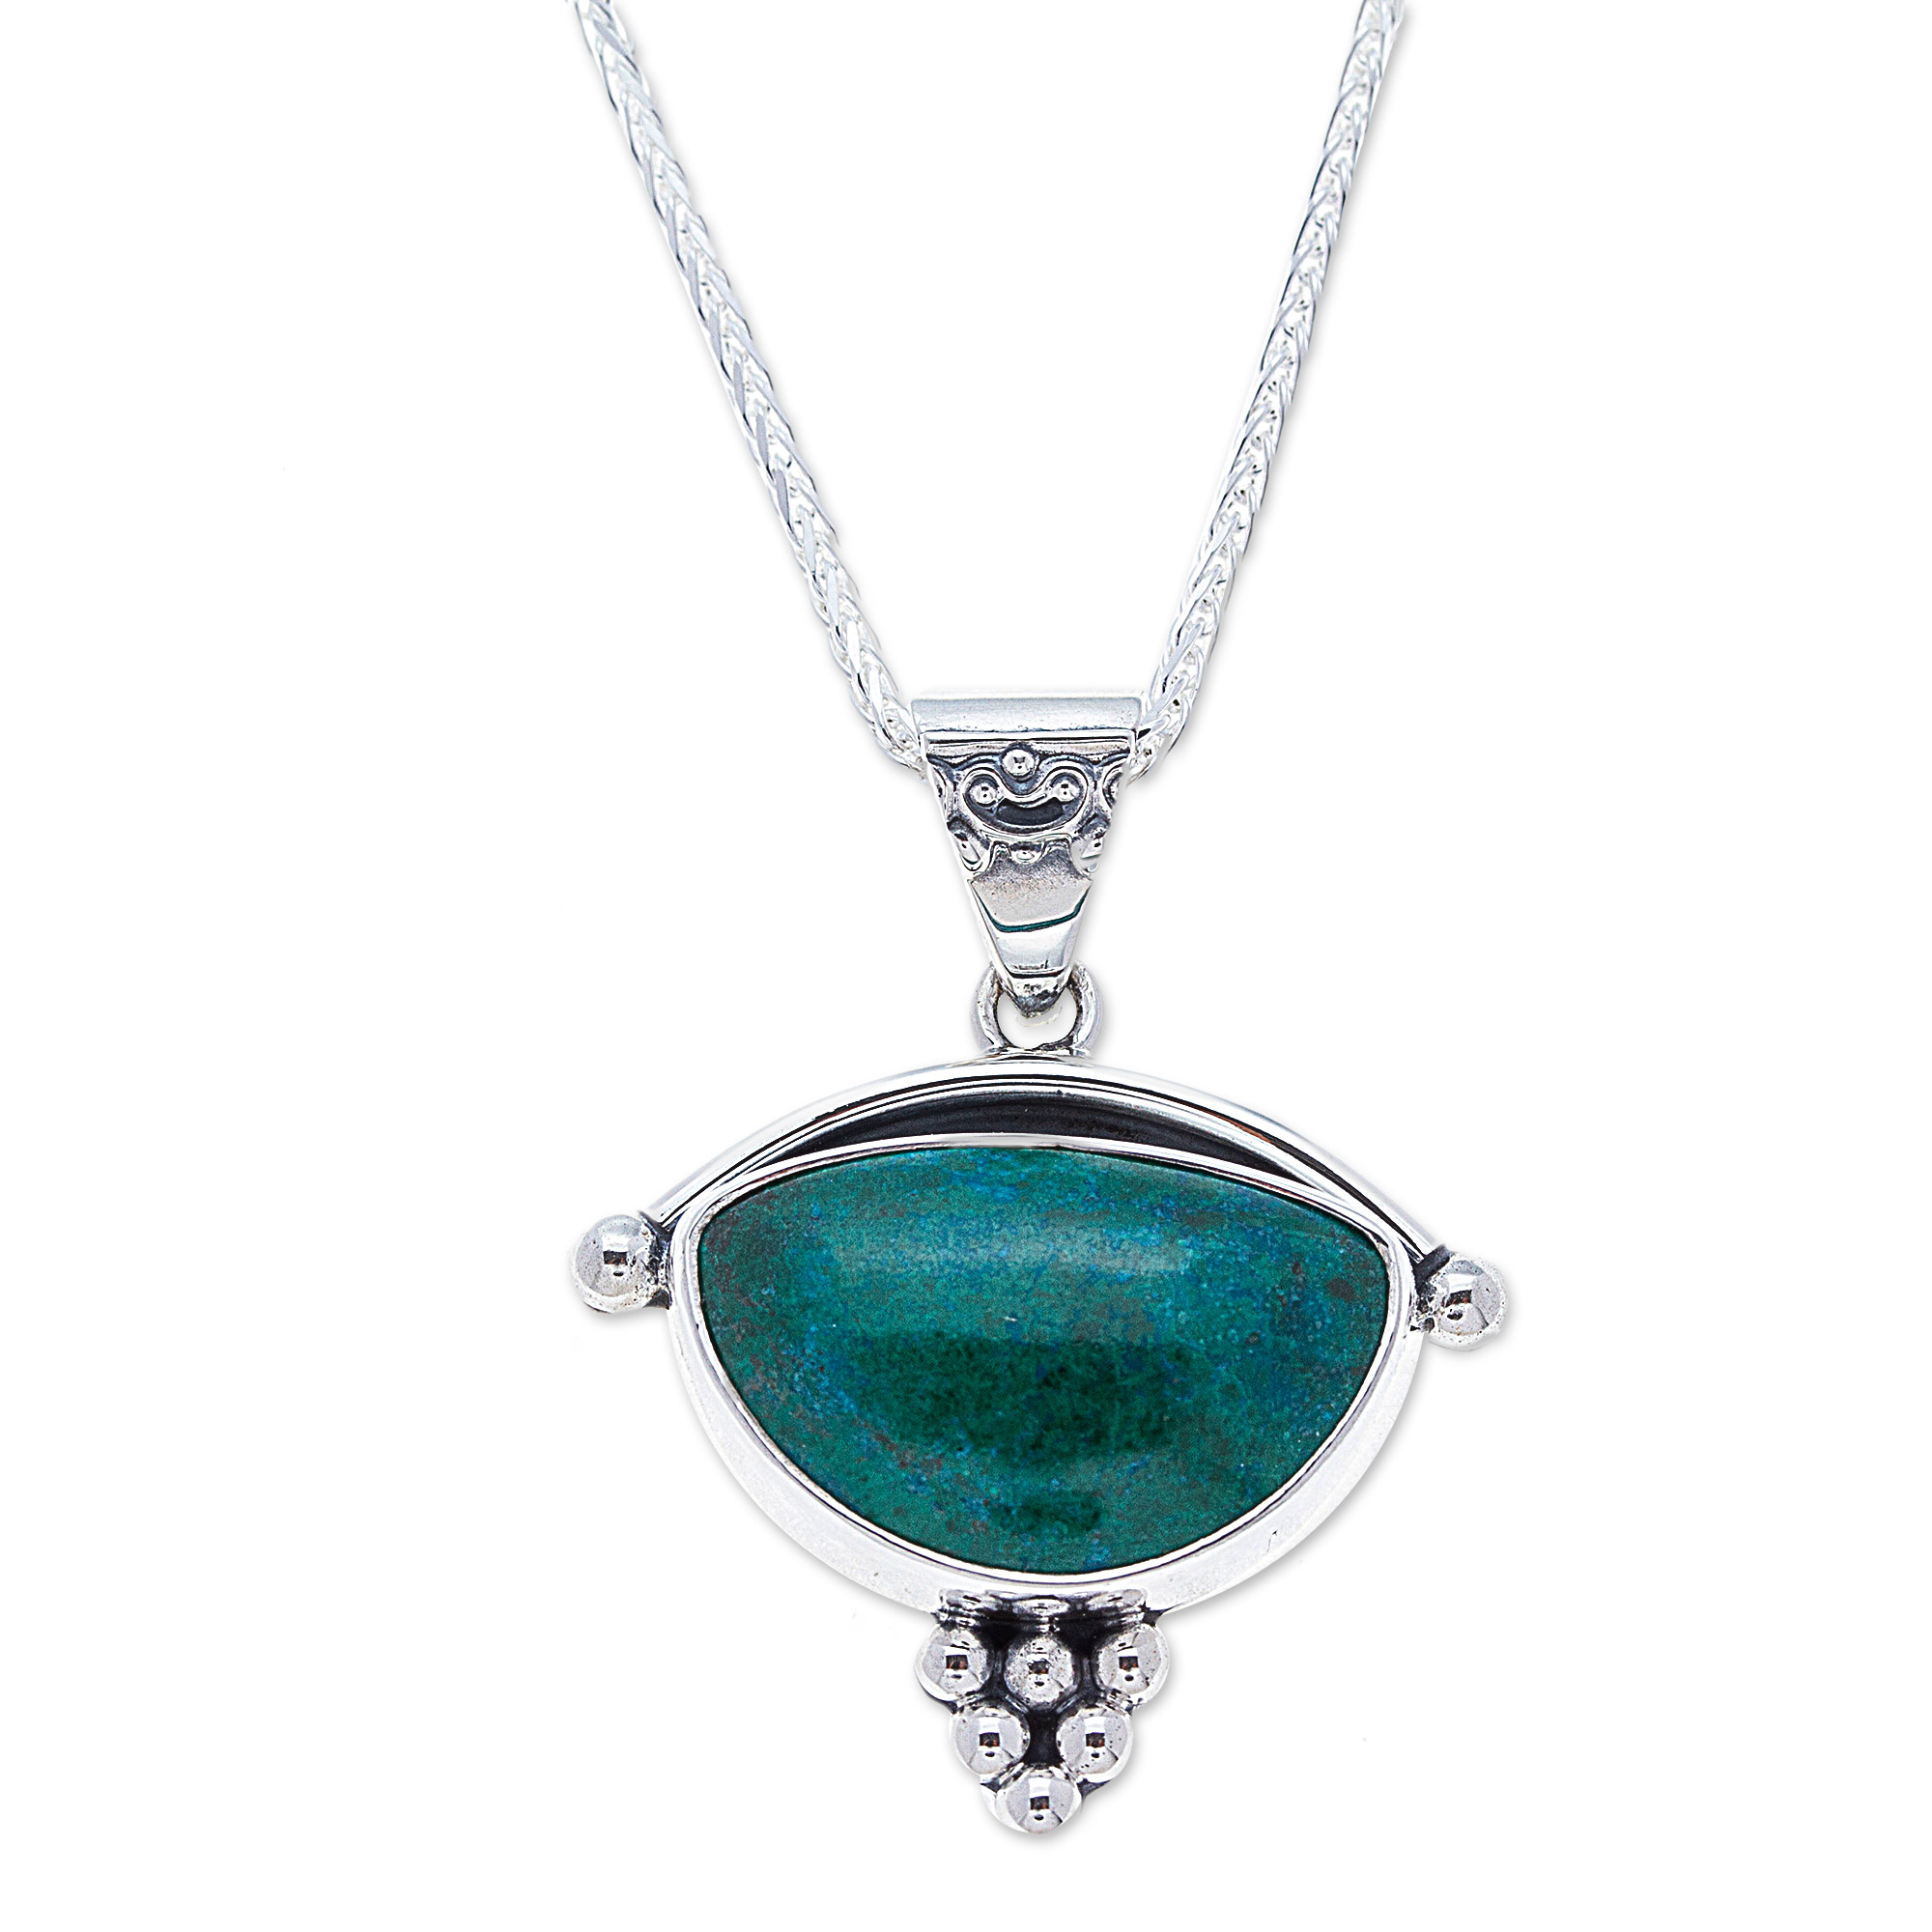 Handmade Mexico Chrysocolla and Silver Pendant Necklace - Taxco ...